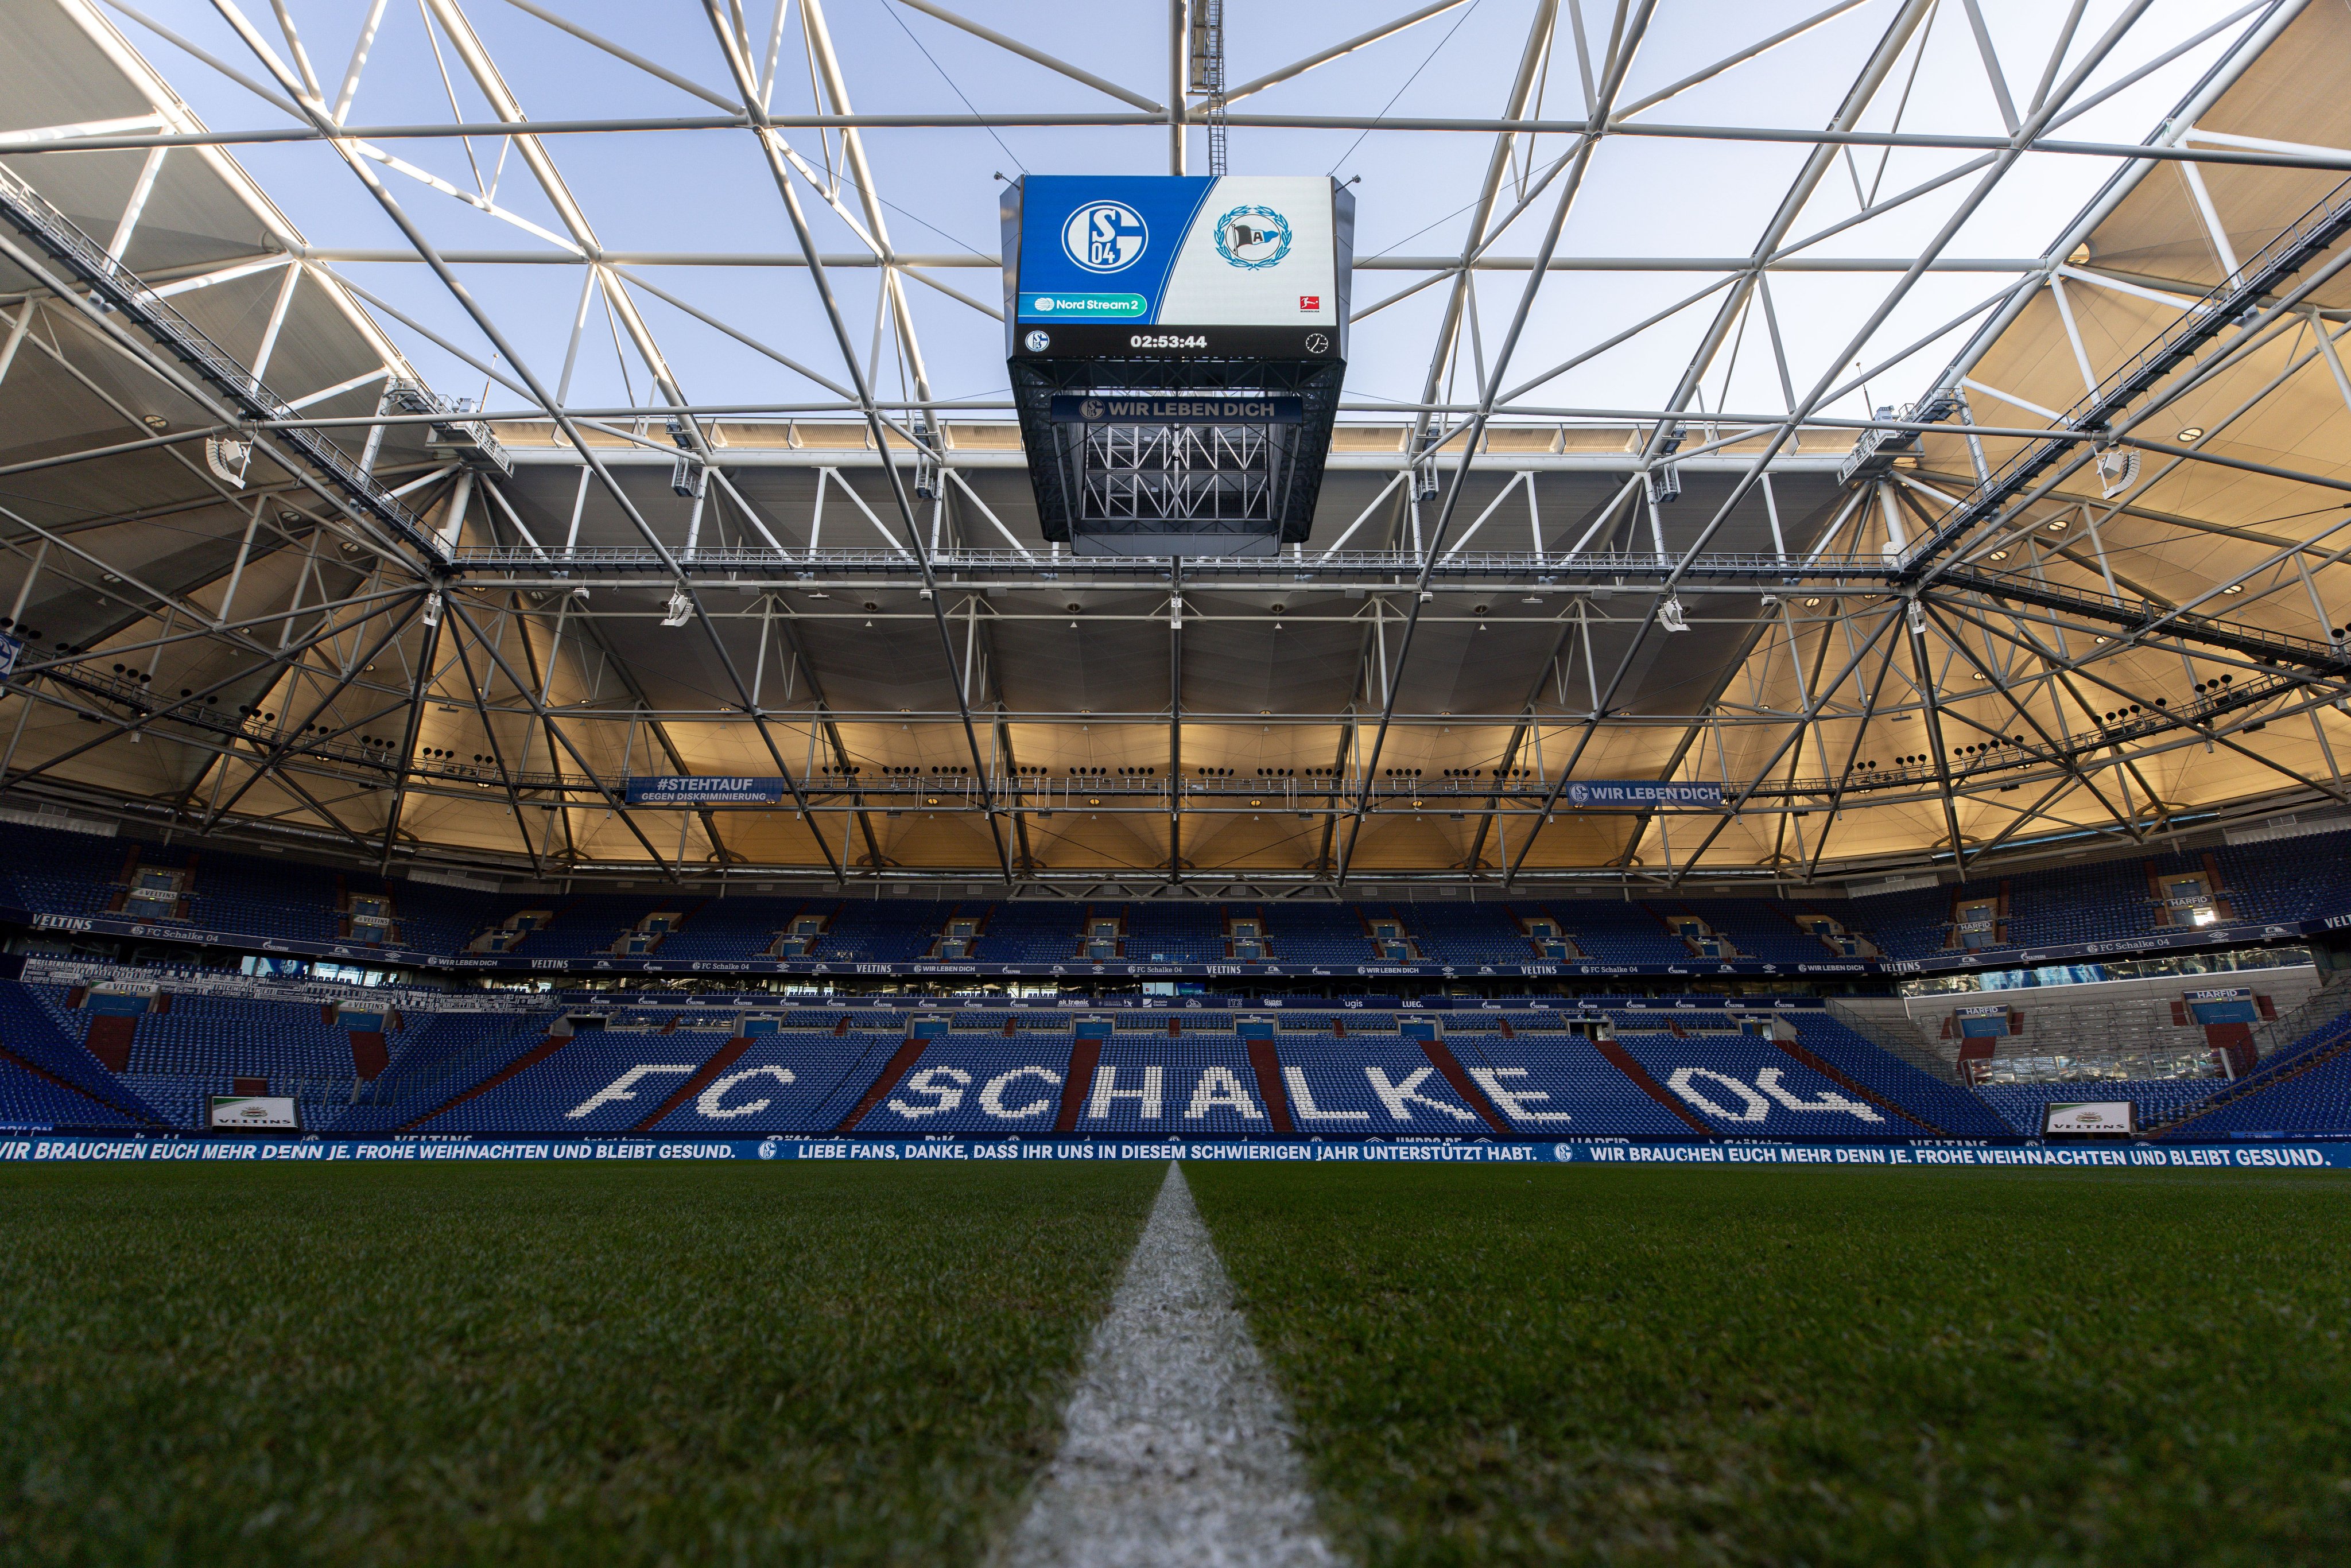 Revolt caused great unrest within Schalke 04’s dressing room, admits Christian Gross